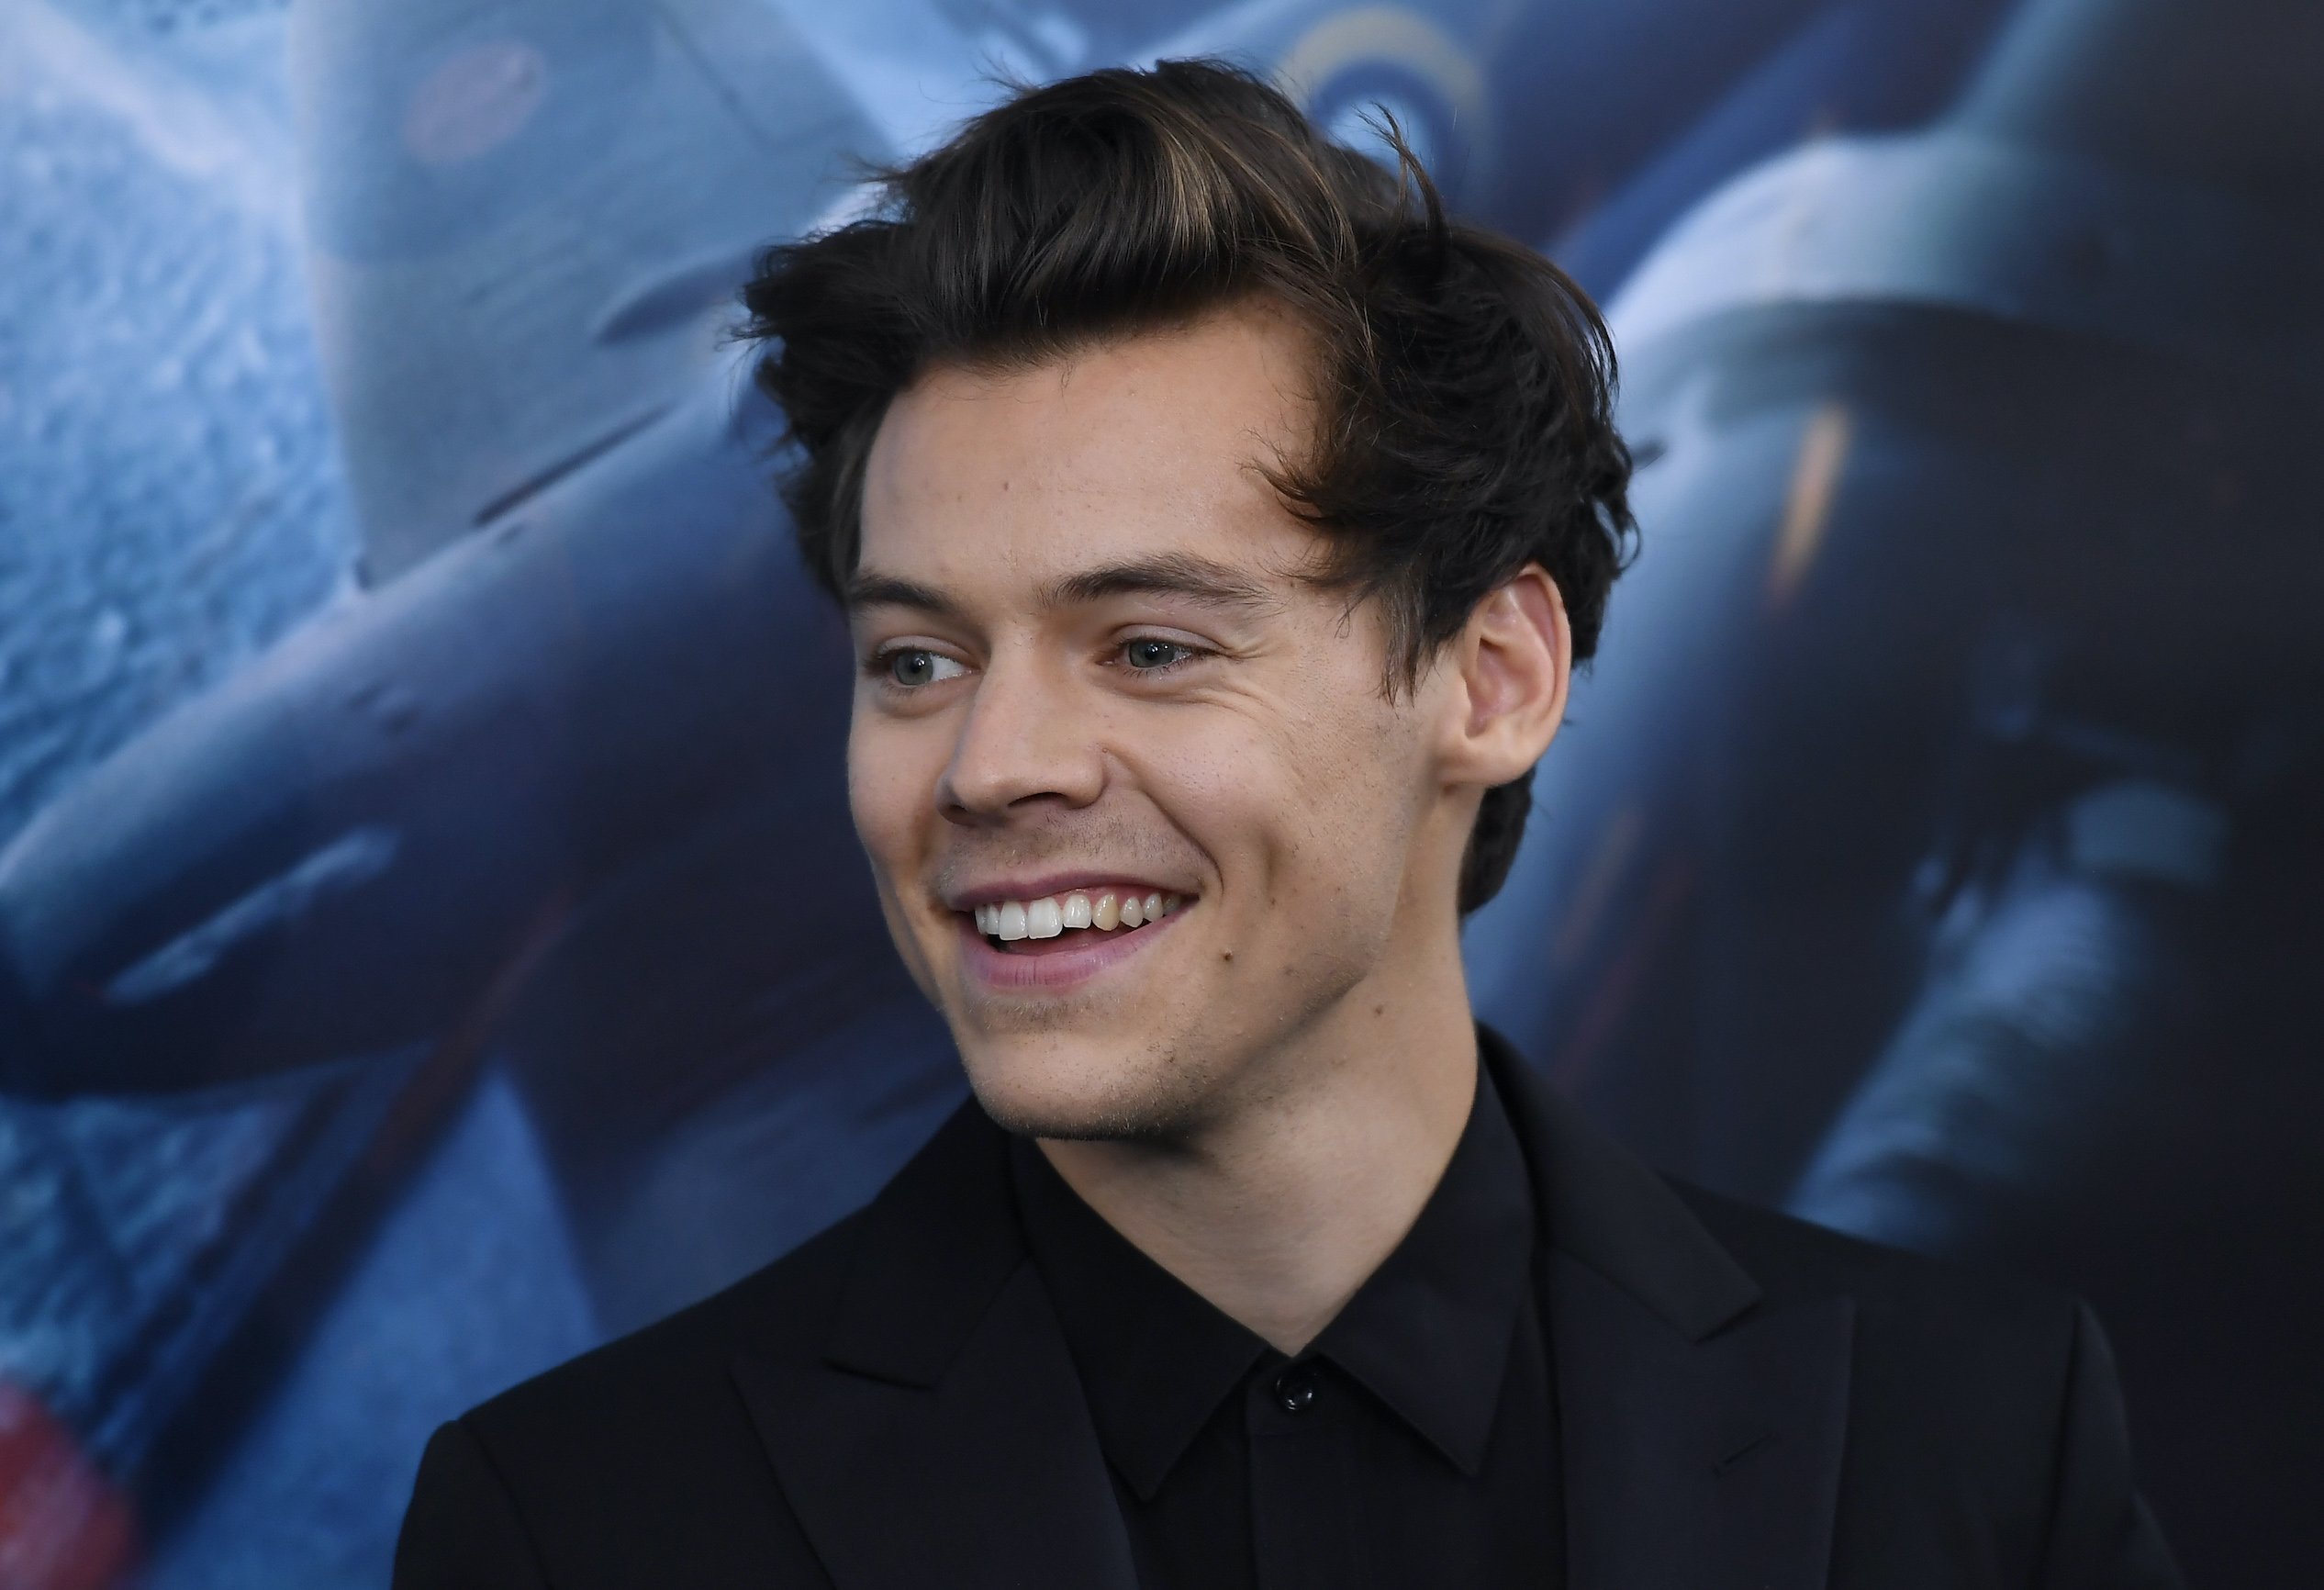 Harry Styles attends the movie premiere of Christophe Nolan's Dunkirk